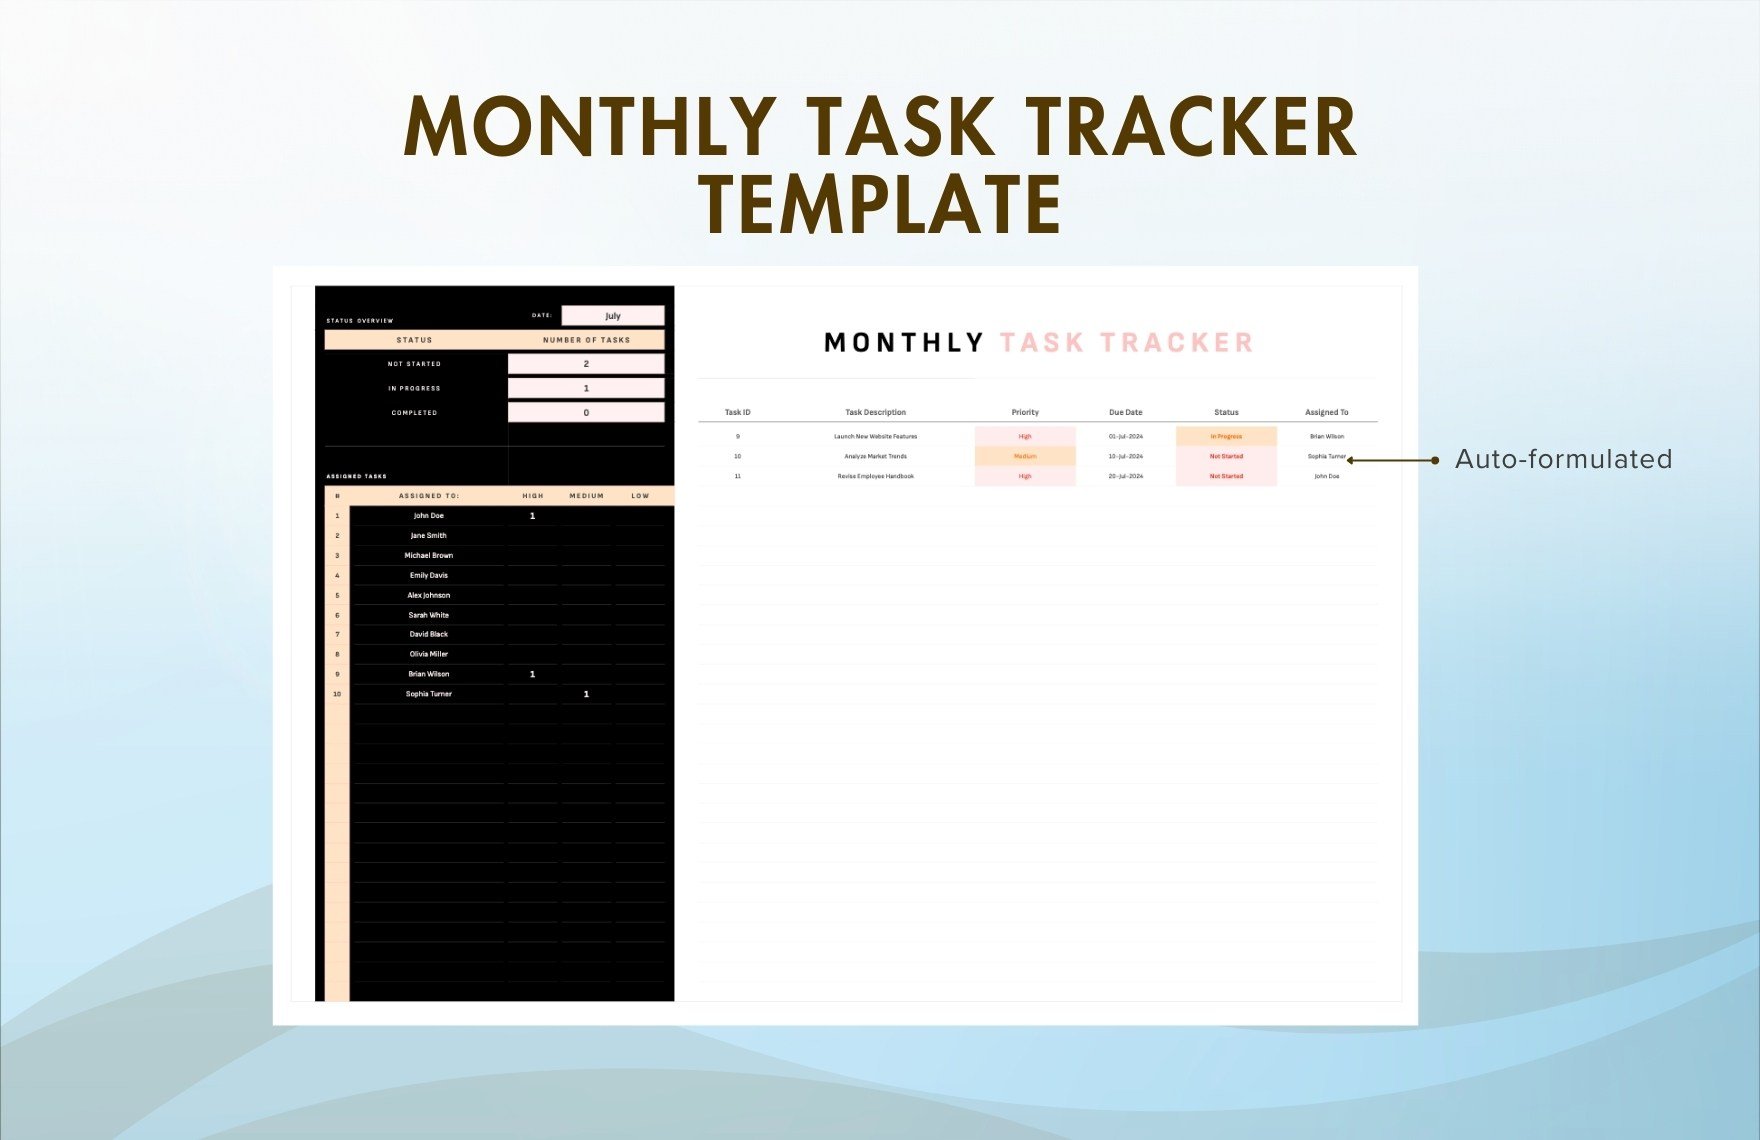 Monthly Task Tracker Template